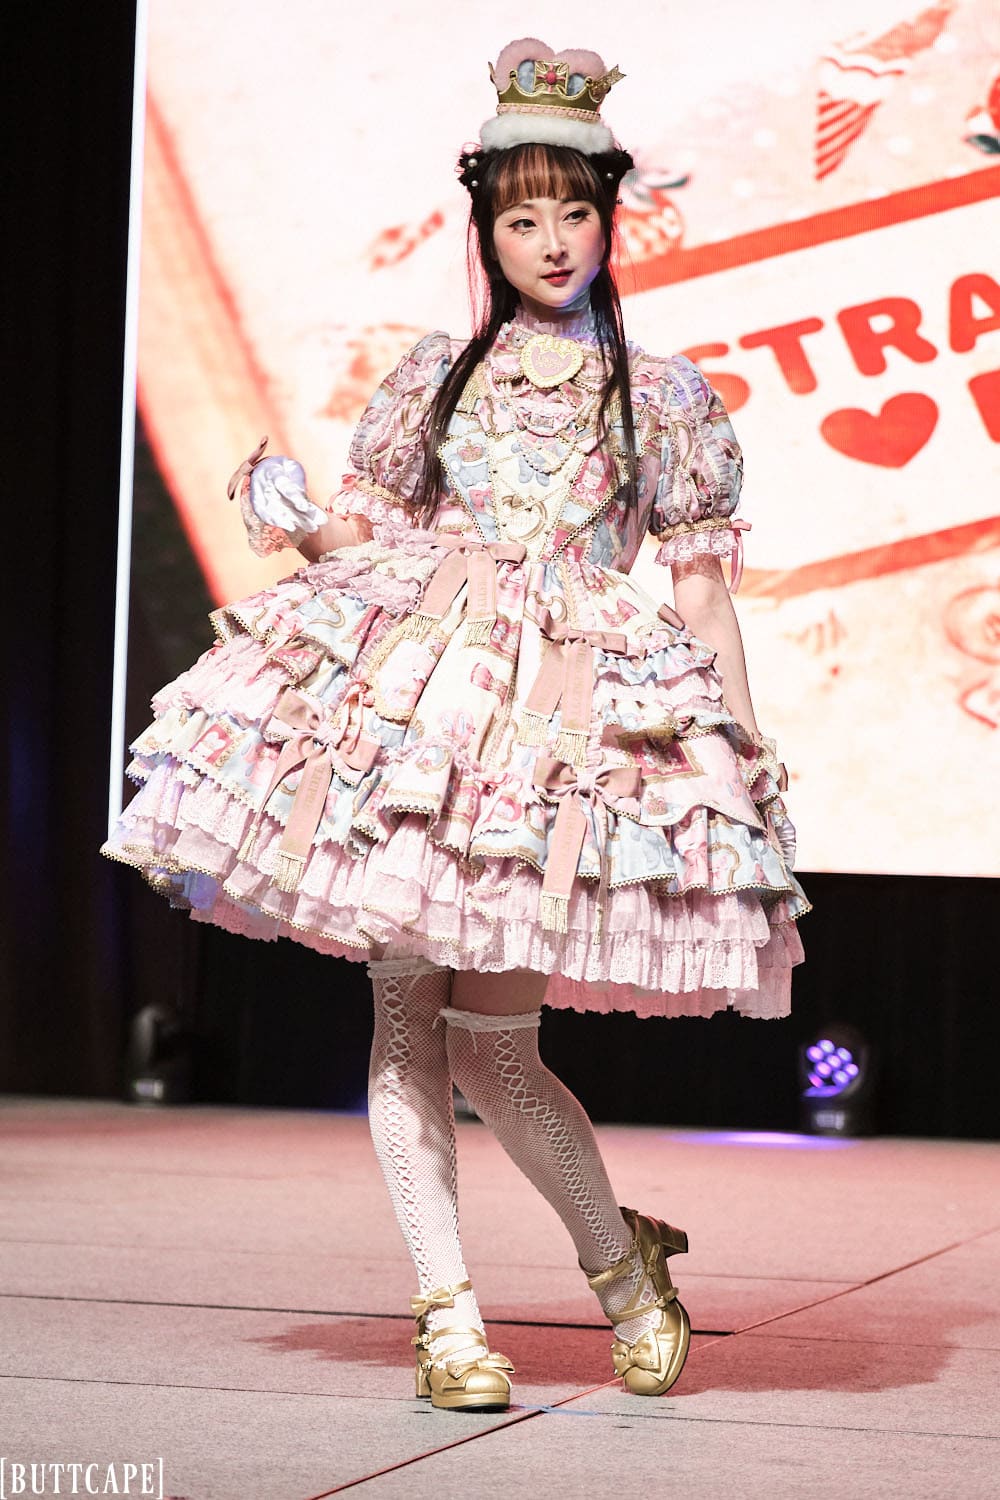 Lolita model Rin Rin Doll wearing over the top frilly Angelic Pretty dress - full body 6.